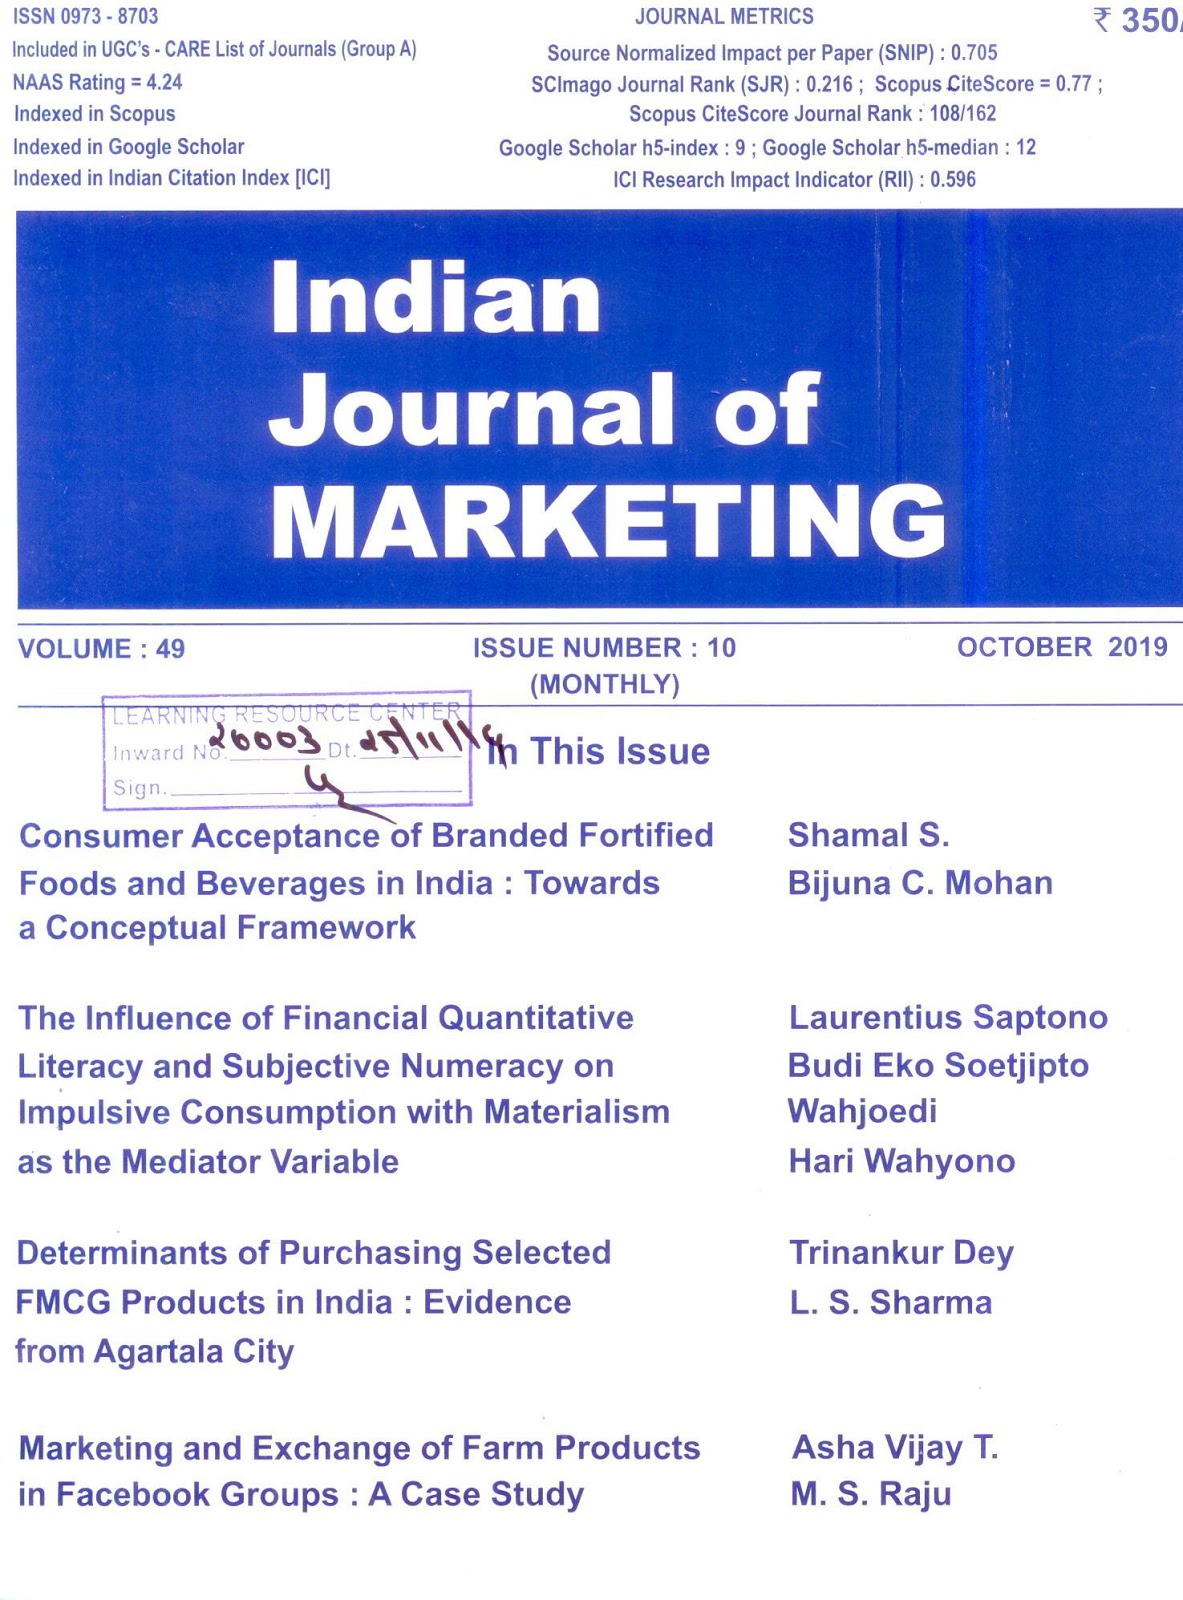 http://indianjournalofmarketing.com/index.php/ijom/issue/view/8659